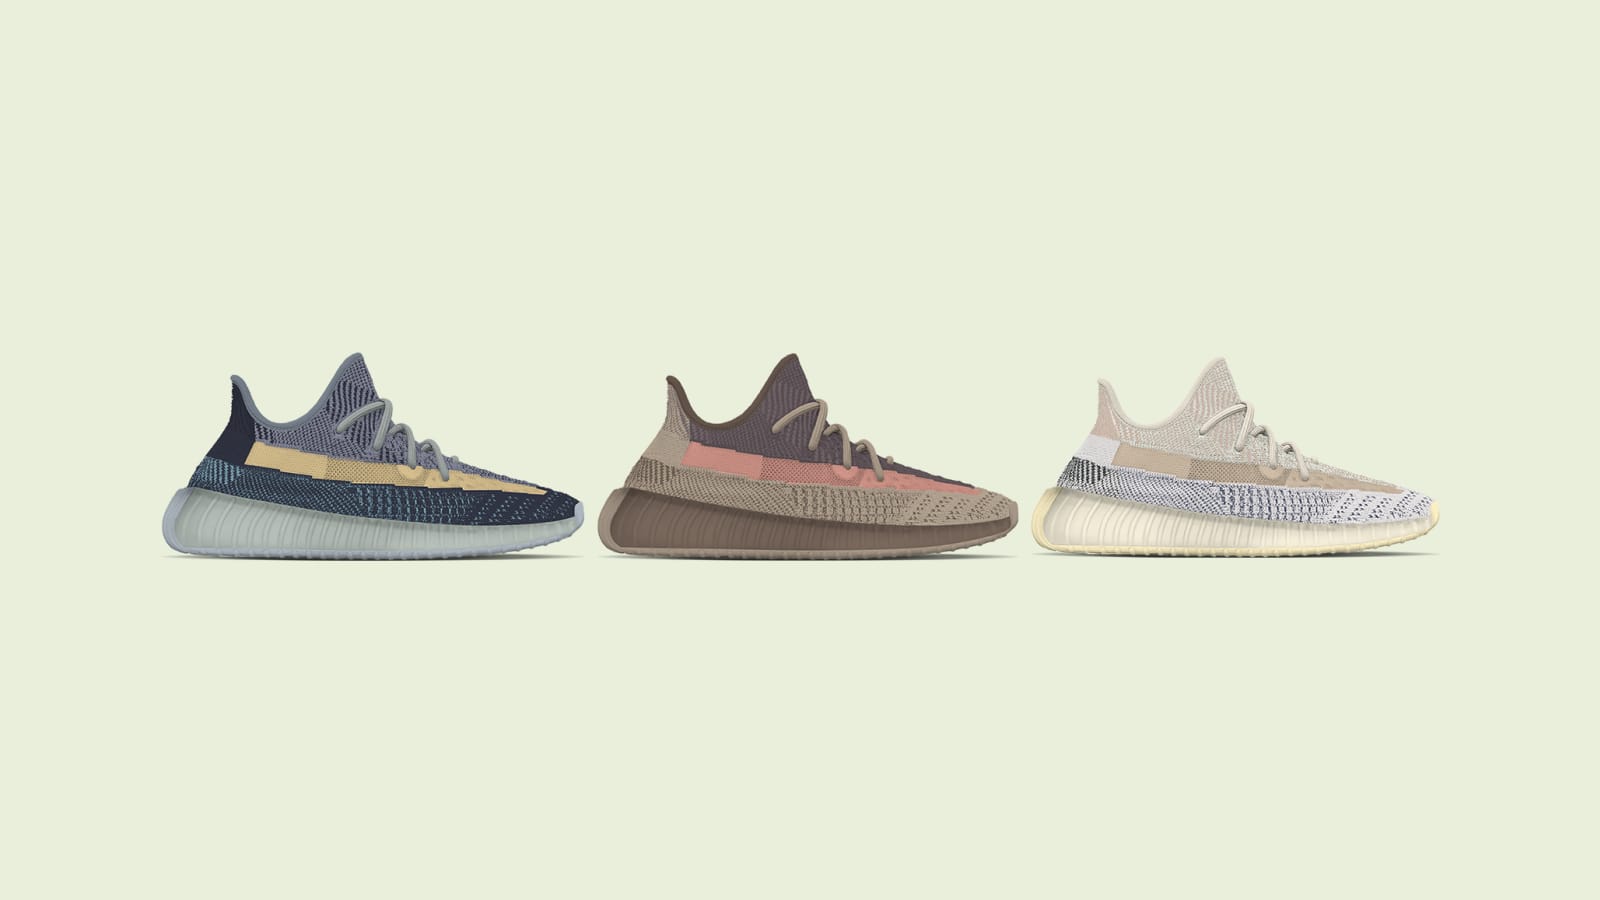 Three Upcoming adidas Yeezy Boost 350 V2 Releases in 2021 ...